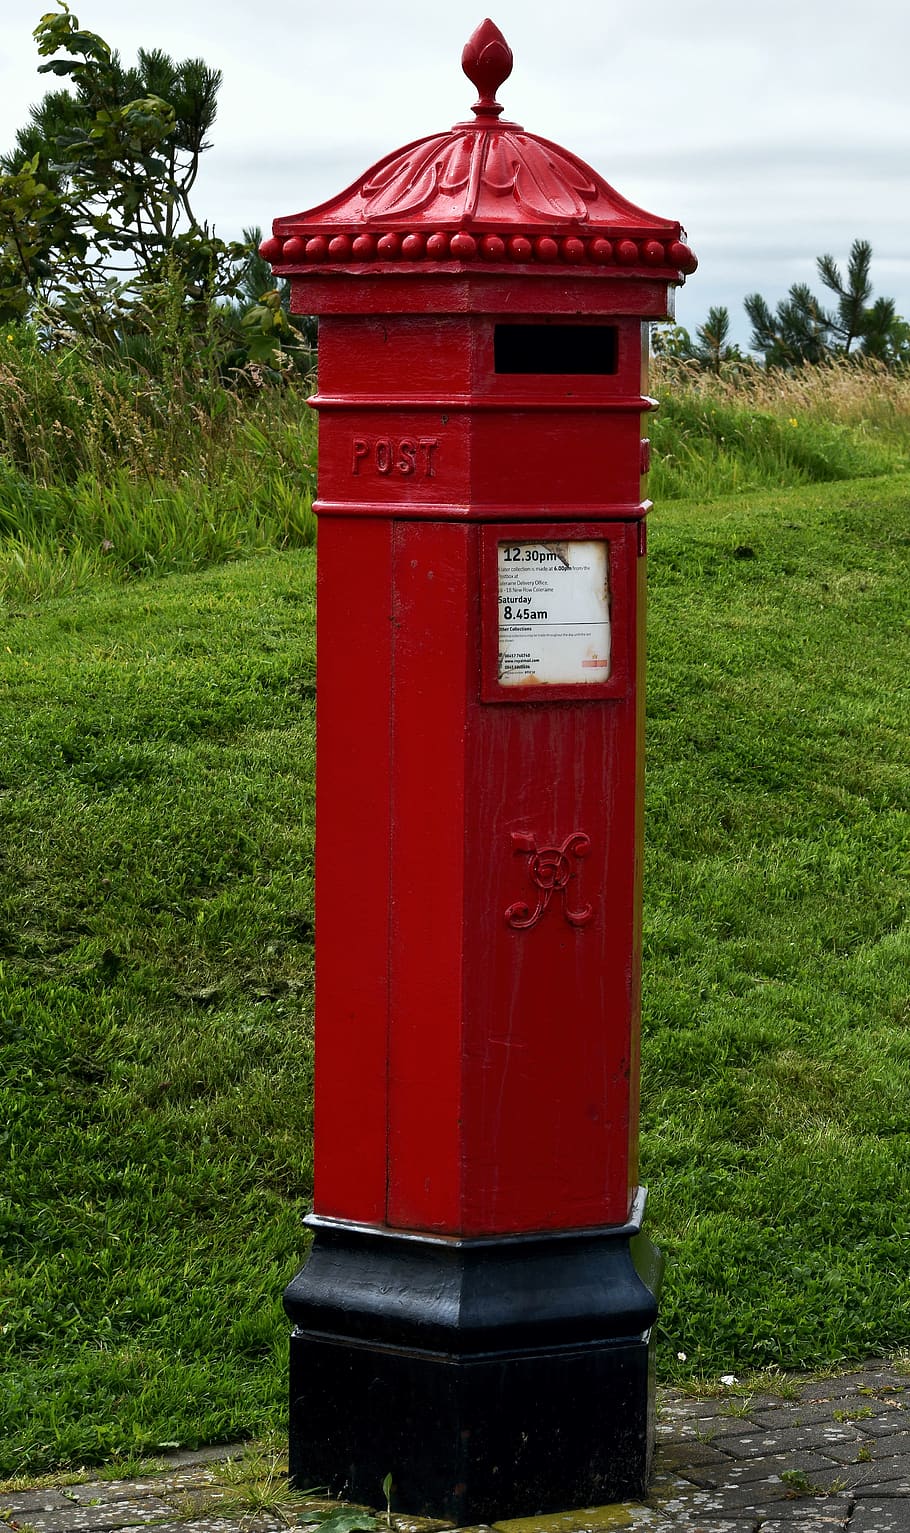 post box, royal mail, northern ireland, bright red, antique, red, grass, communication, mailbox, plant